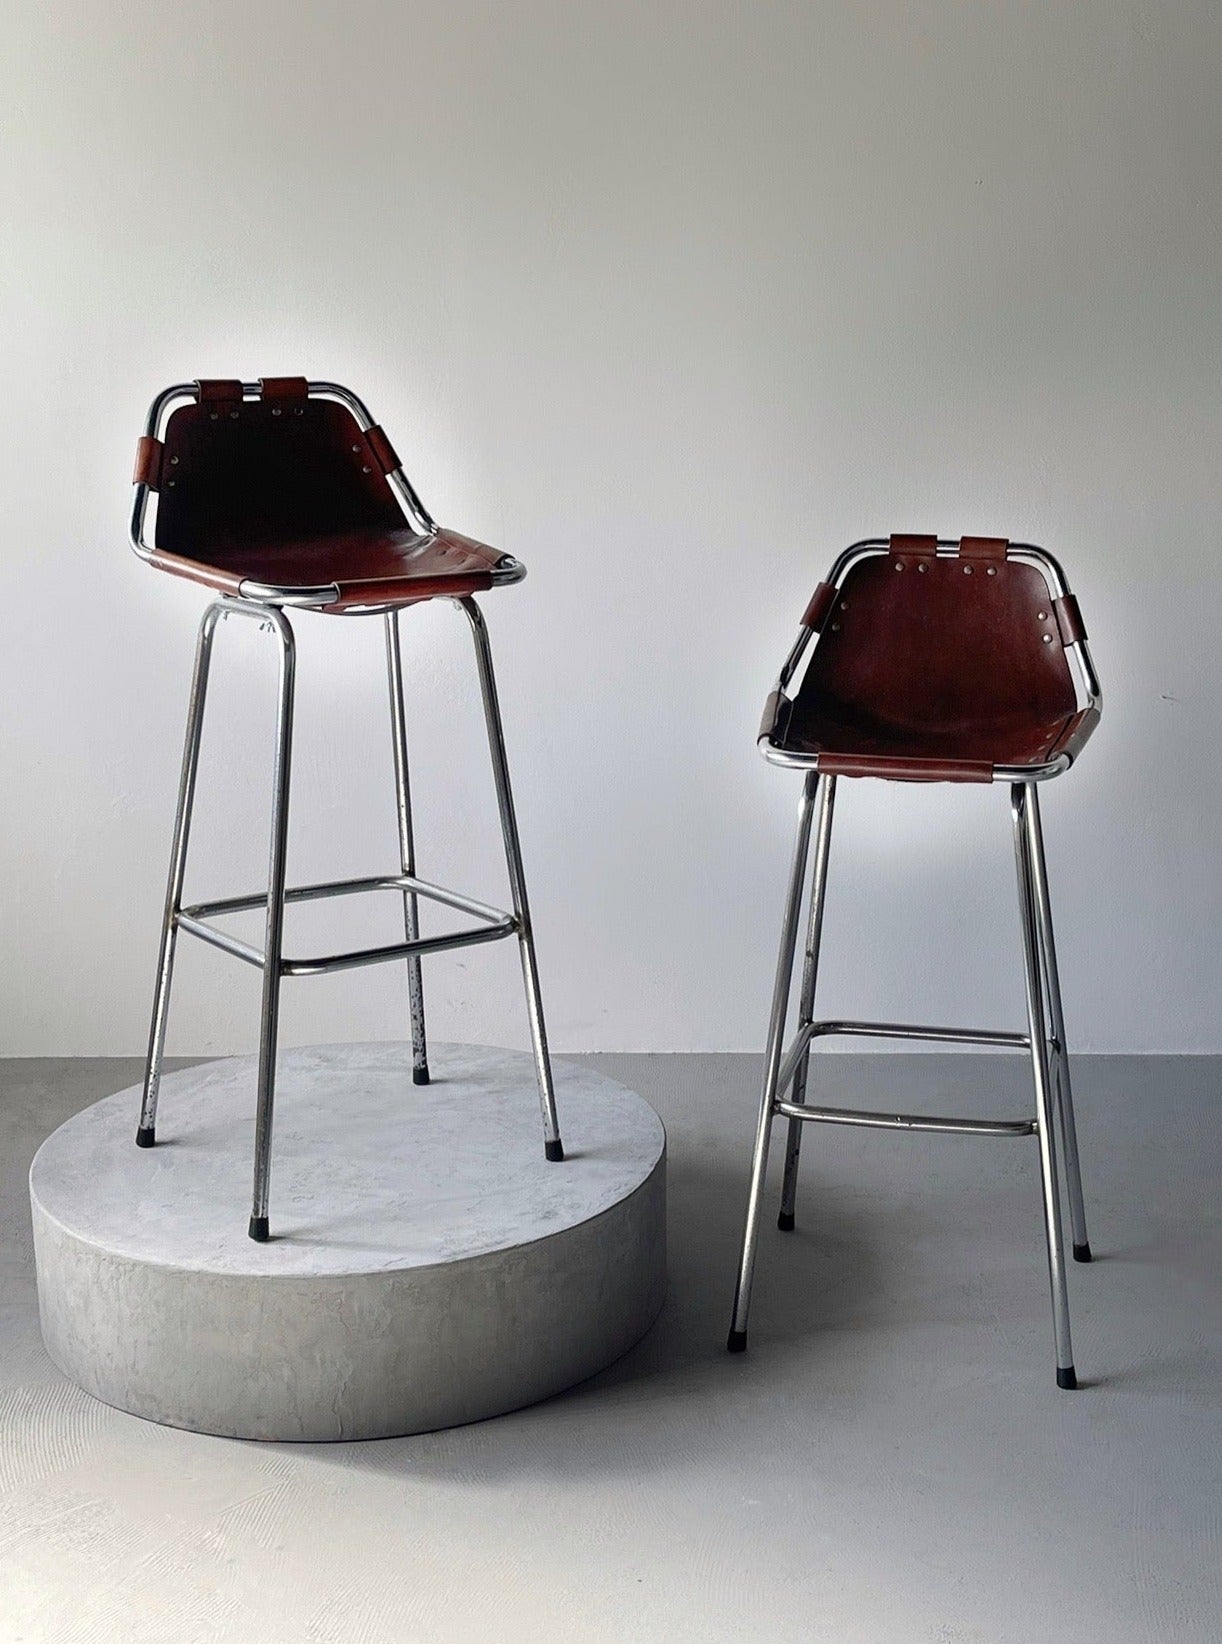 Les Arcs bar stool selected by Charlotte Perriand